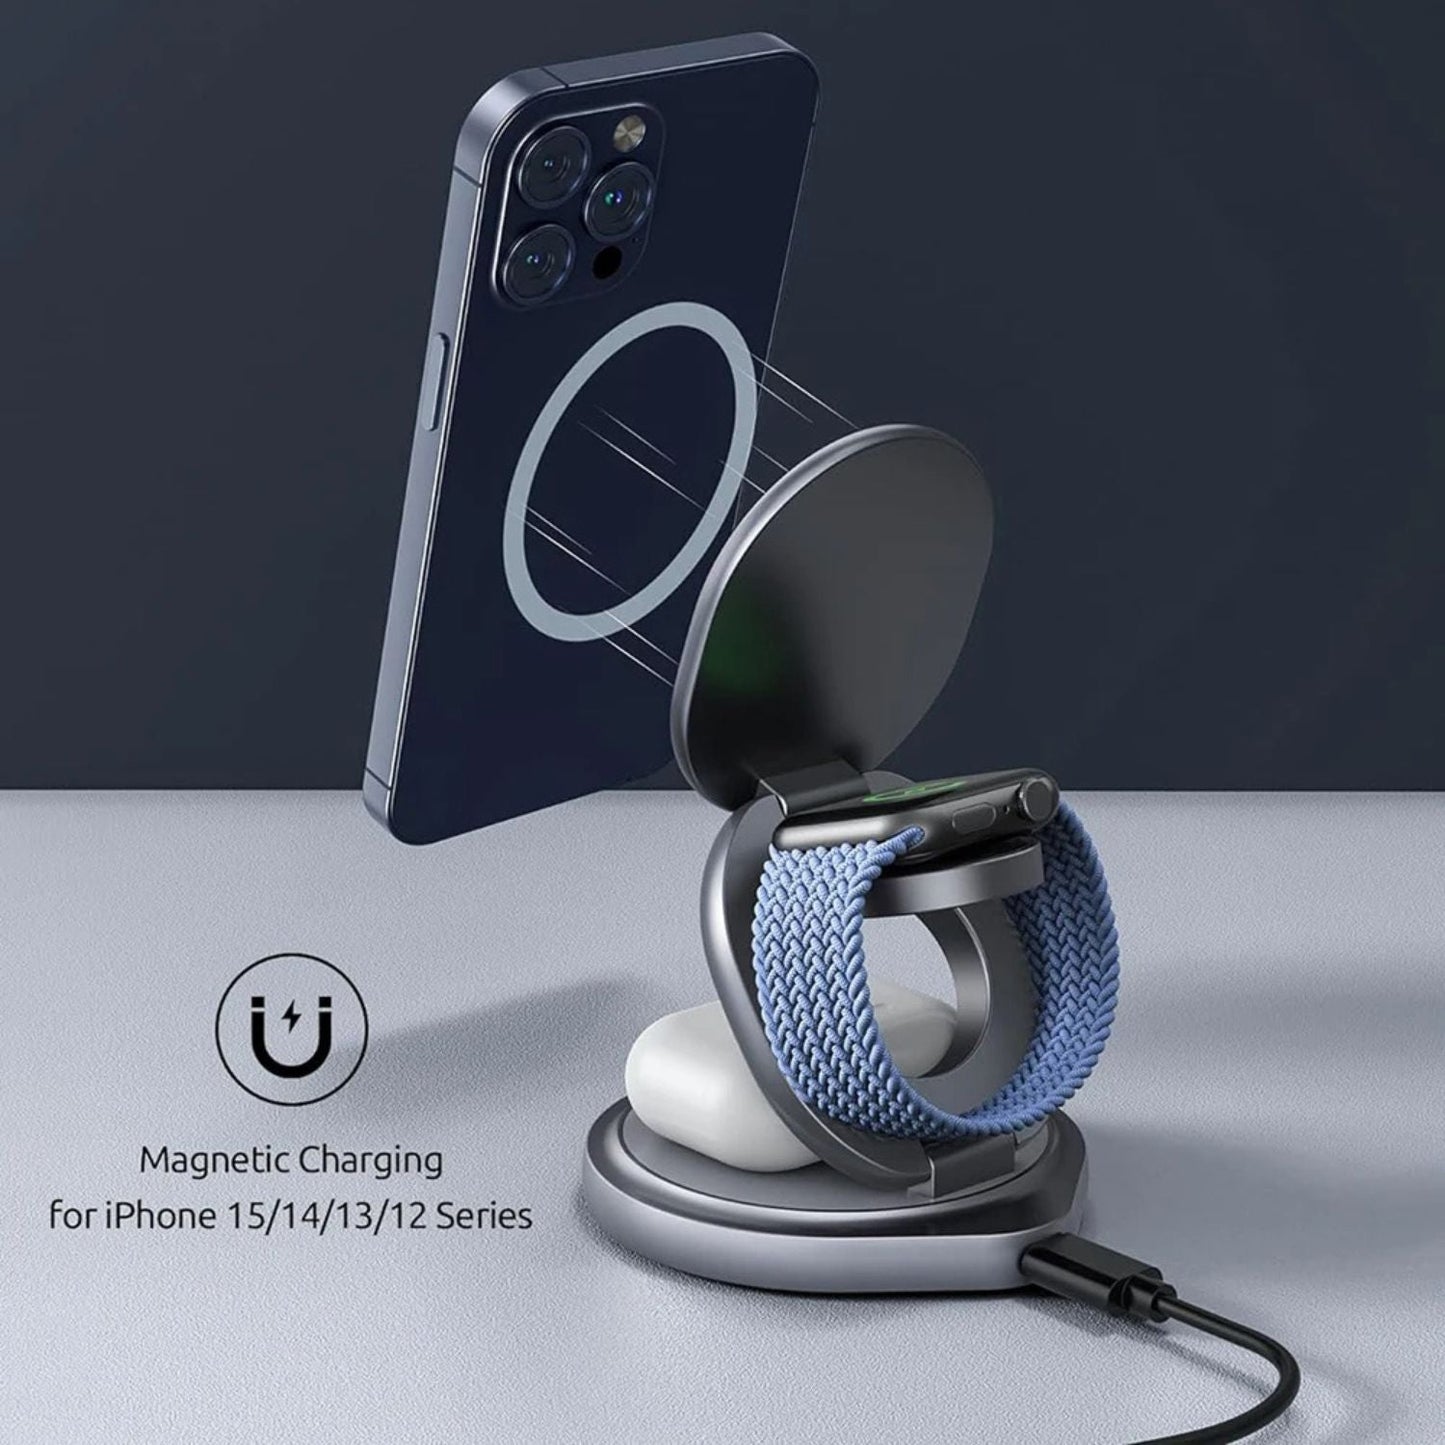 ChargePal Trio: The Ultimate Rotating Charger